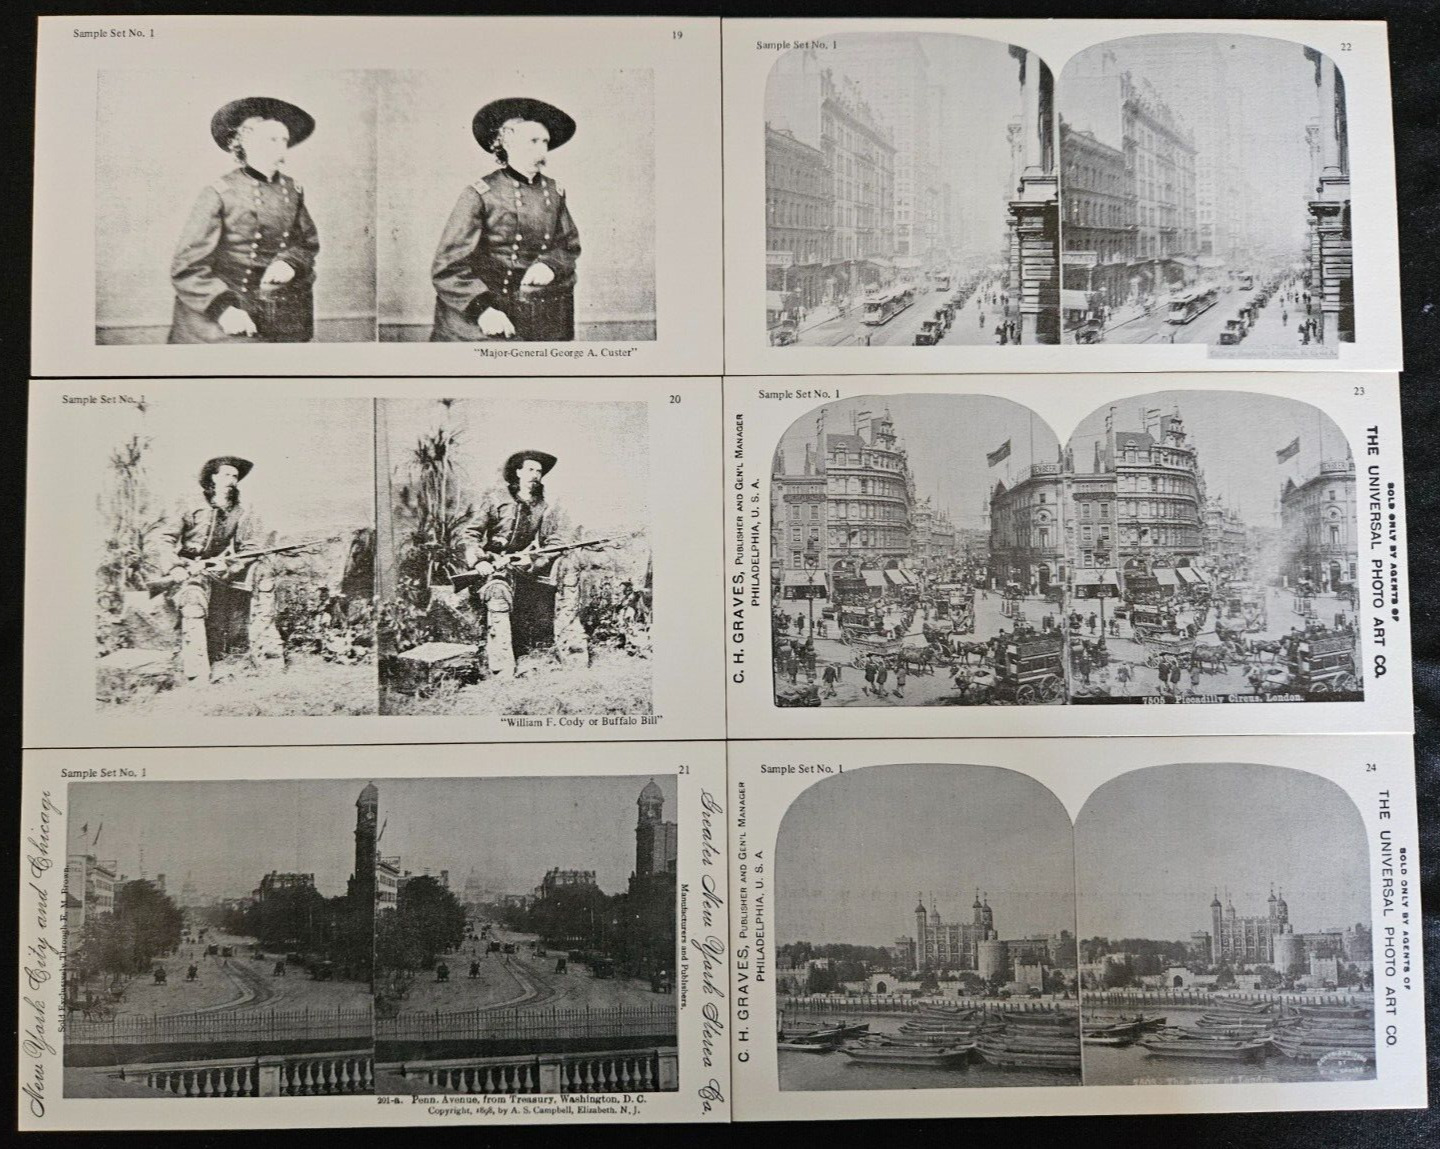 6 Stereoscope Cards, Stereo Classic Studios, Sample Set No 1 (Lot 4 of 5). 1981.